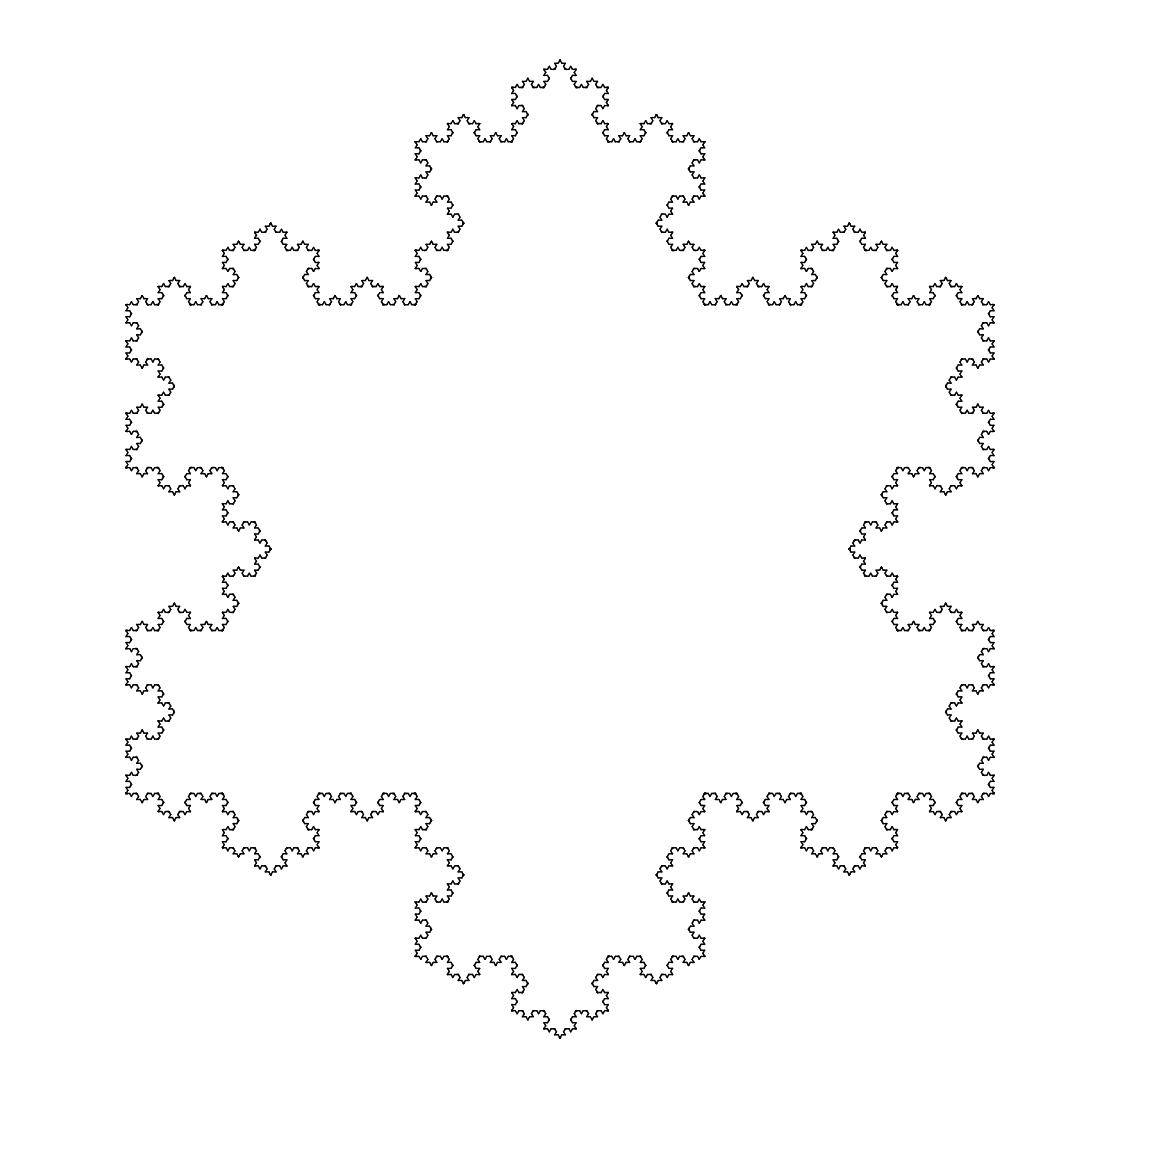 Coloring Lush snowflake. Category The contour snowflakes. Tags:  Snowflakes, snow, winter.